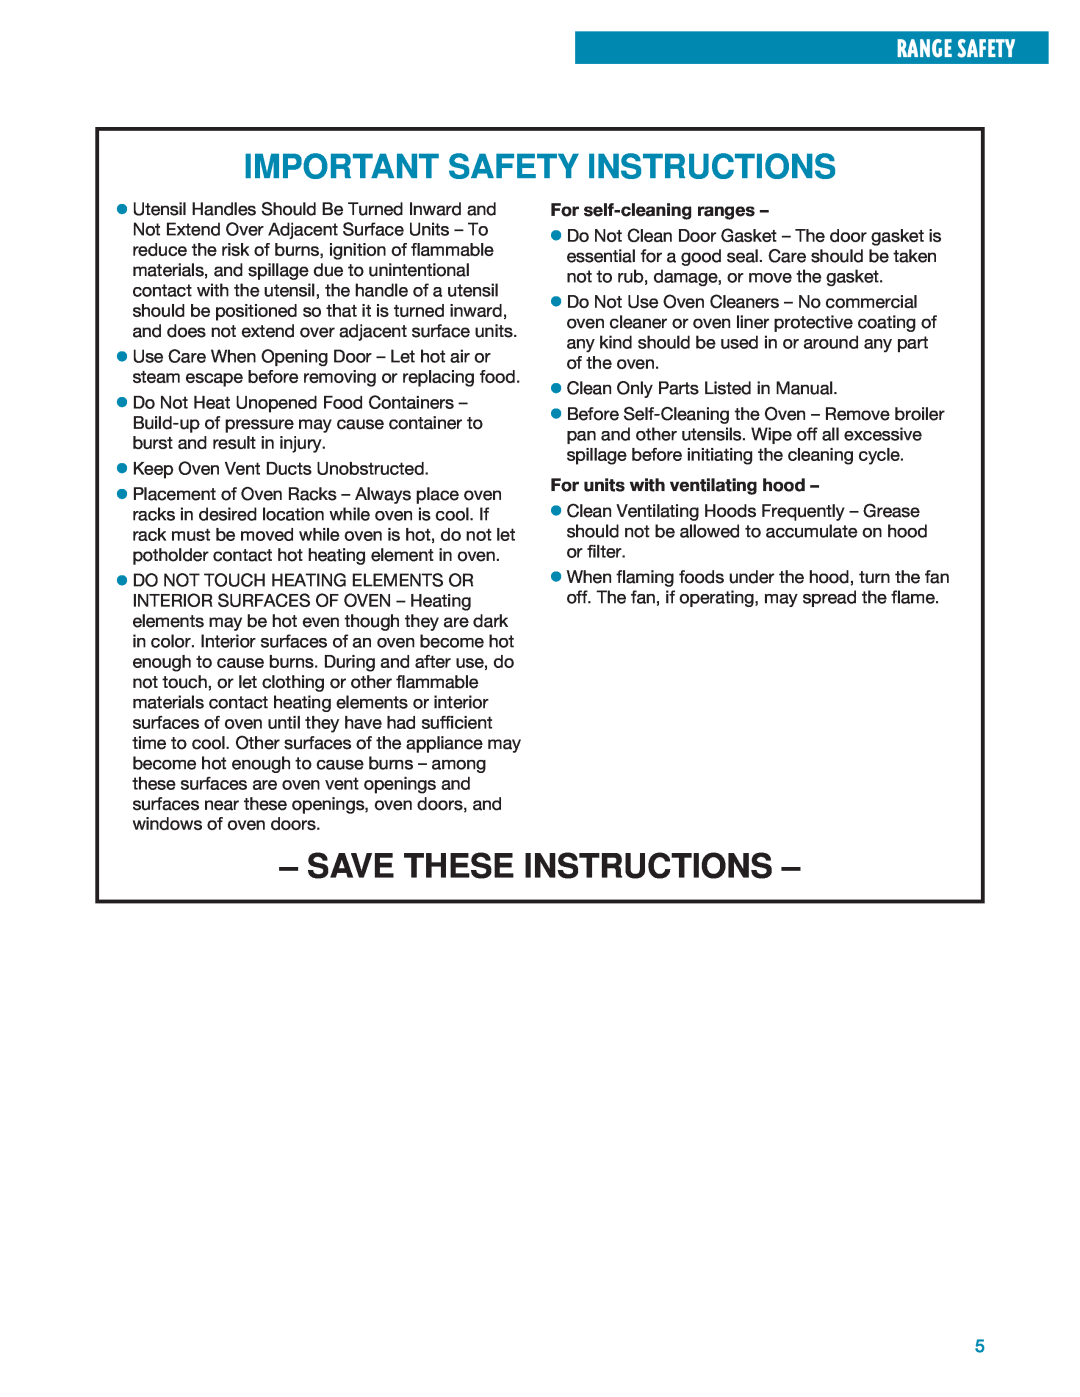 Whirlpool SF304PEE warranty Important Safety Instructions, Save These Instructions, Range Safety, For self-cleaning ranges 